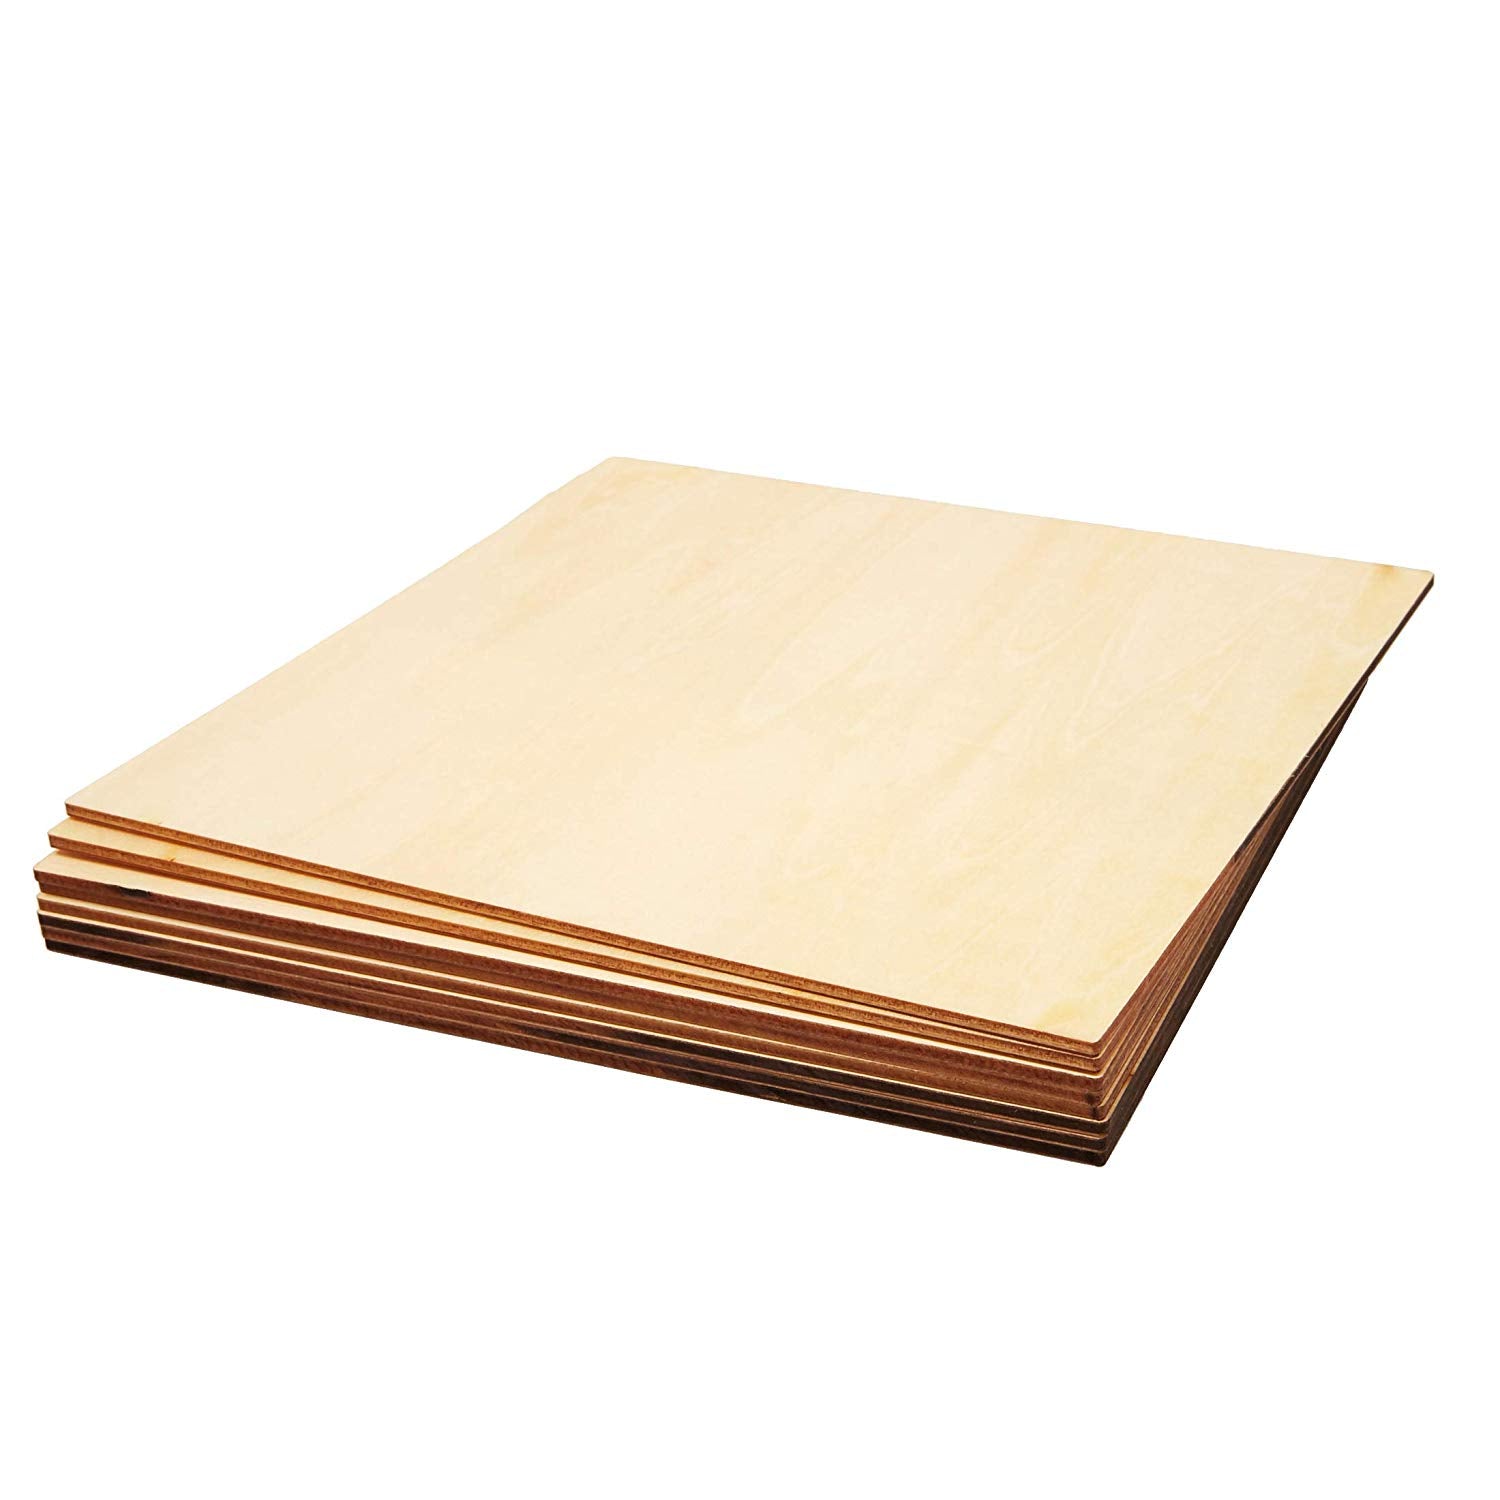 Wooden Squares for Crafts, Panel Board (6 x 6 in, 8-Pack)